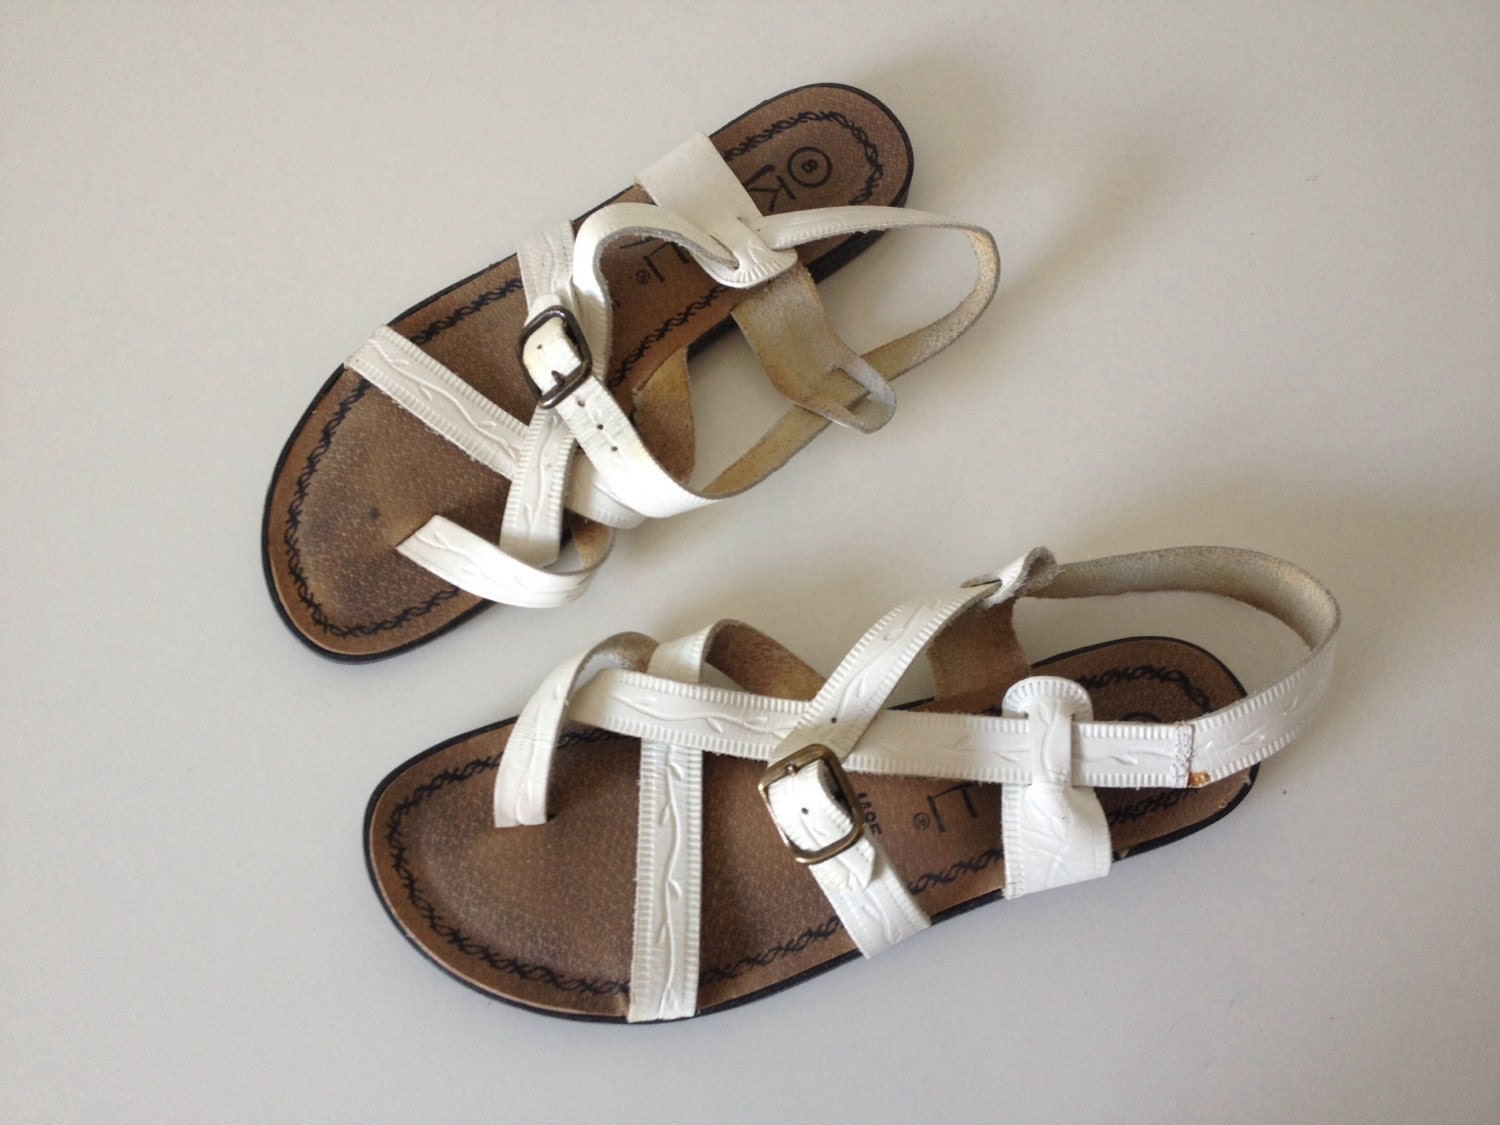  70s  Sandals  White Leather  Sandals  Strappy Flats Tooled